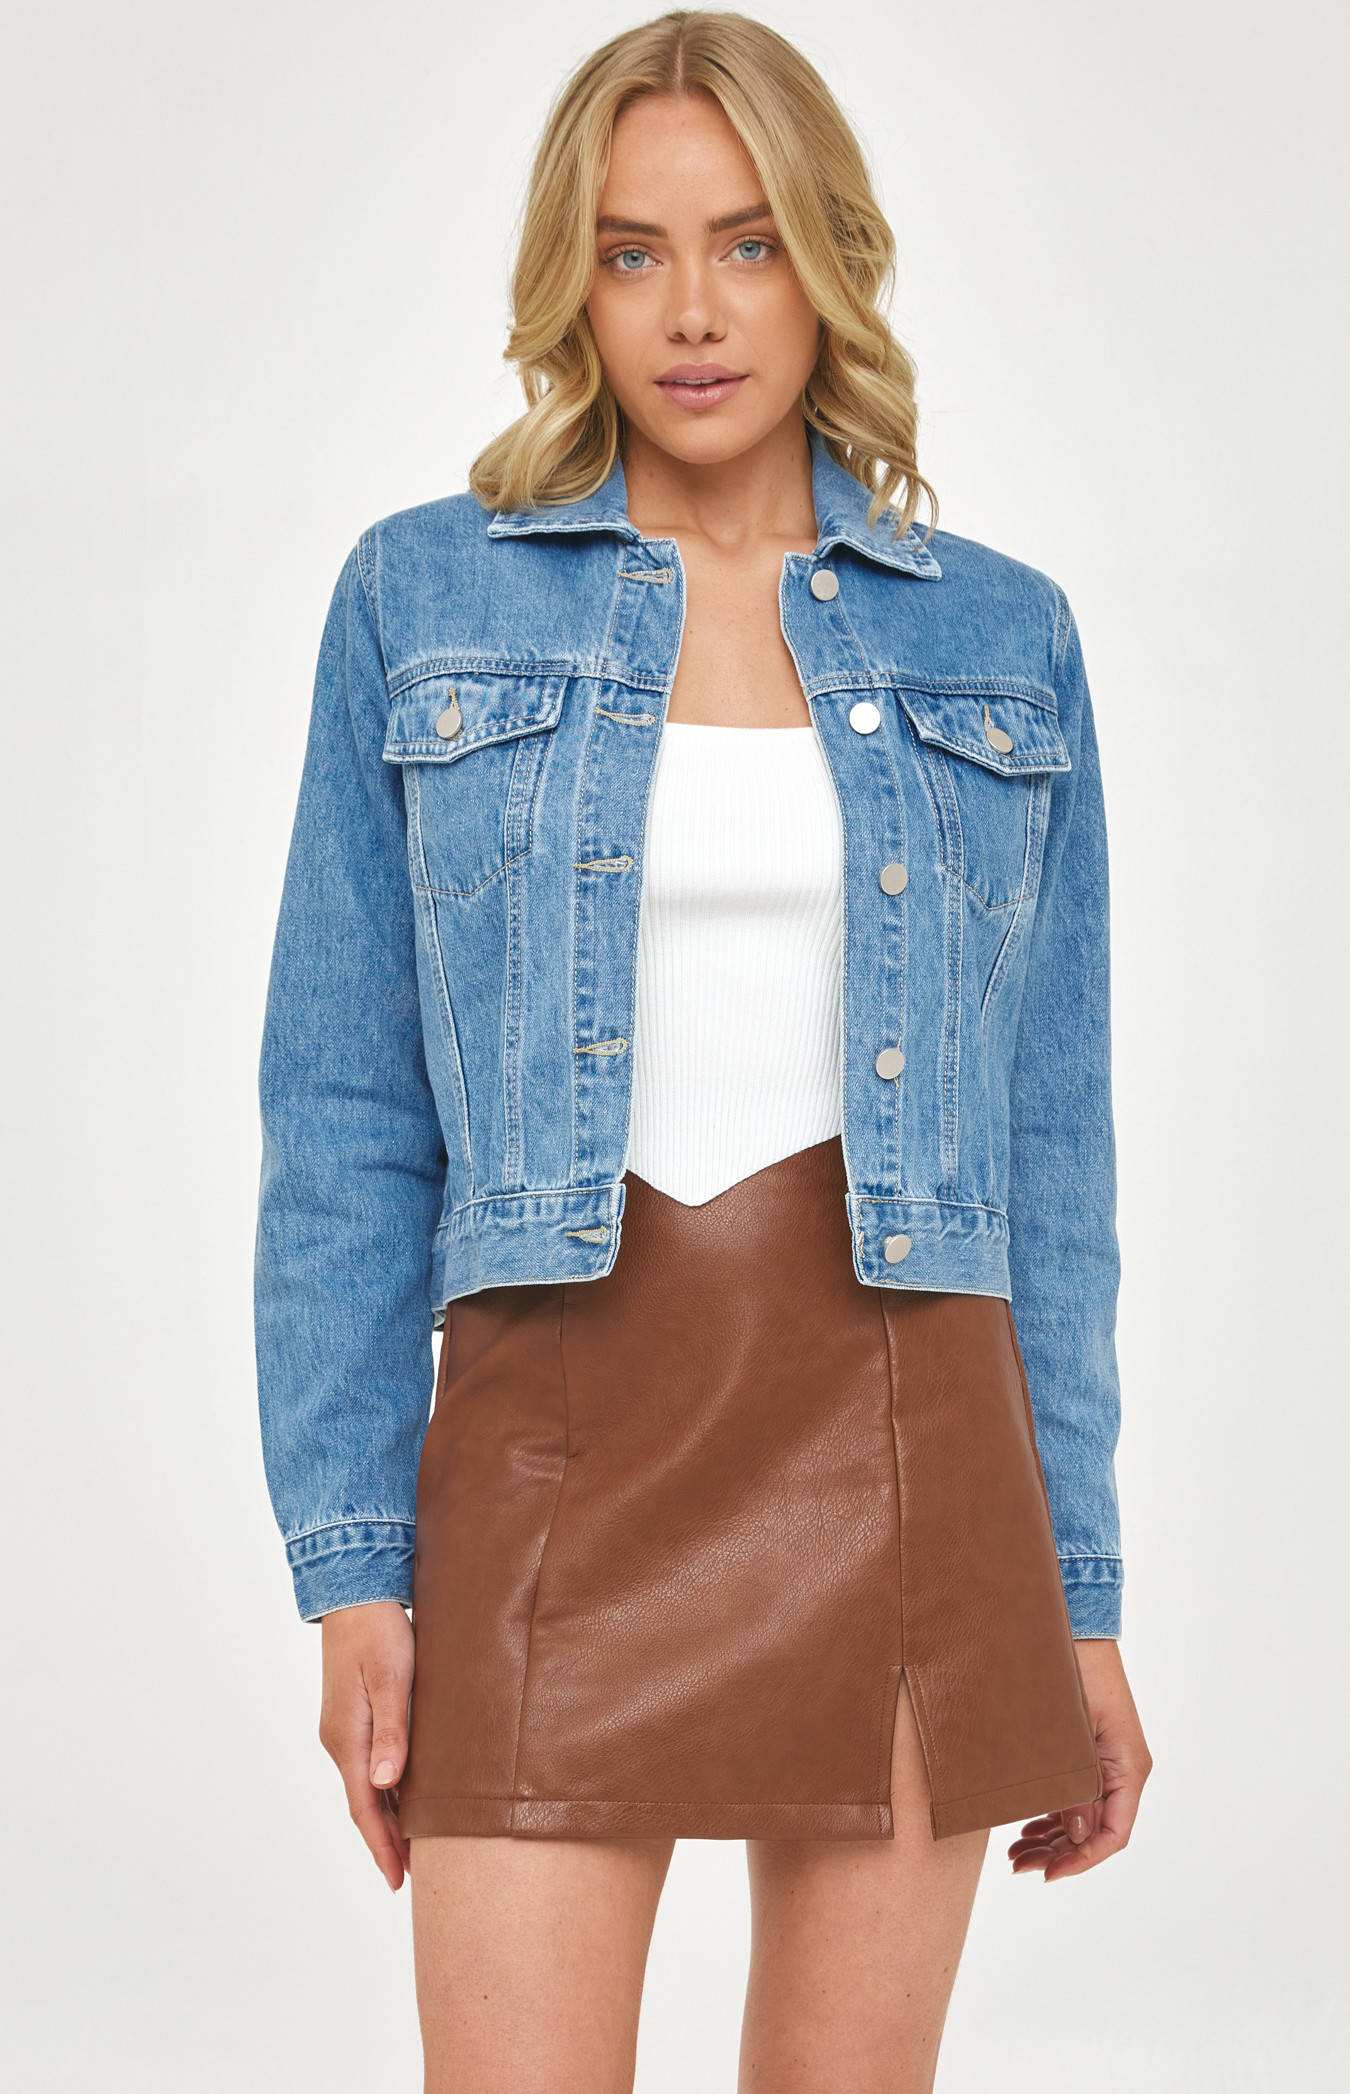 Denim Jacket with Front Pockets and Seam Details (SDM125)